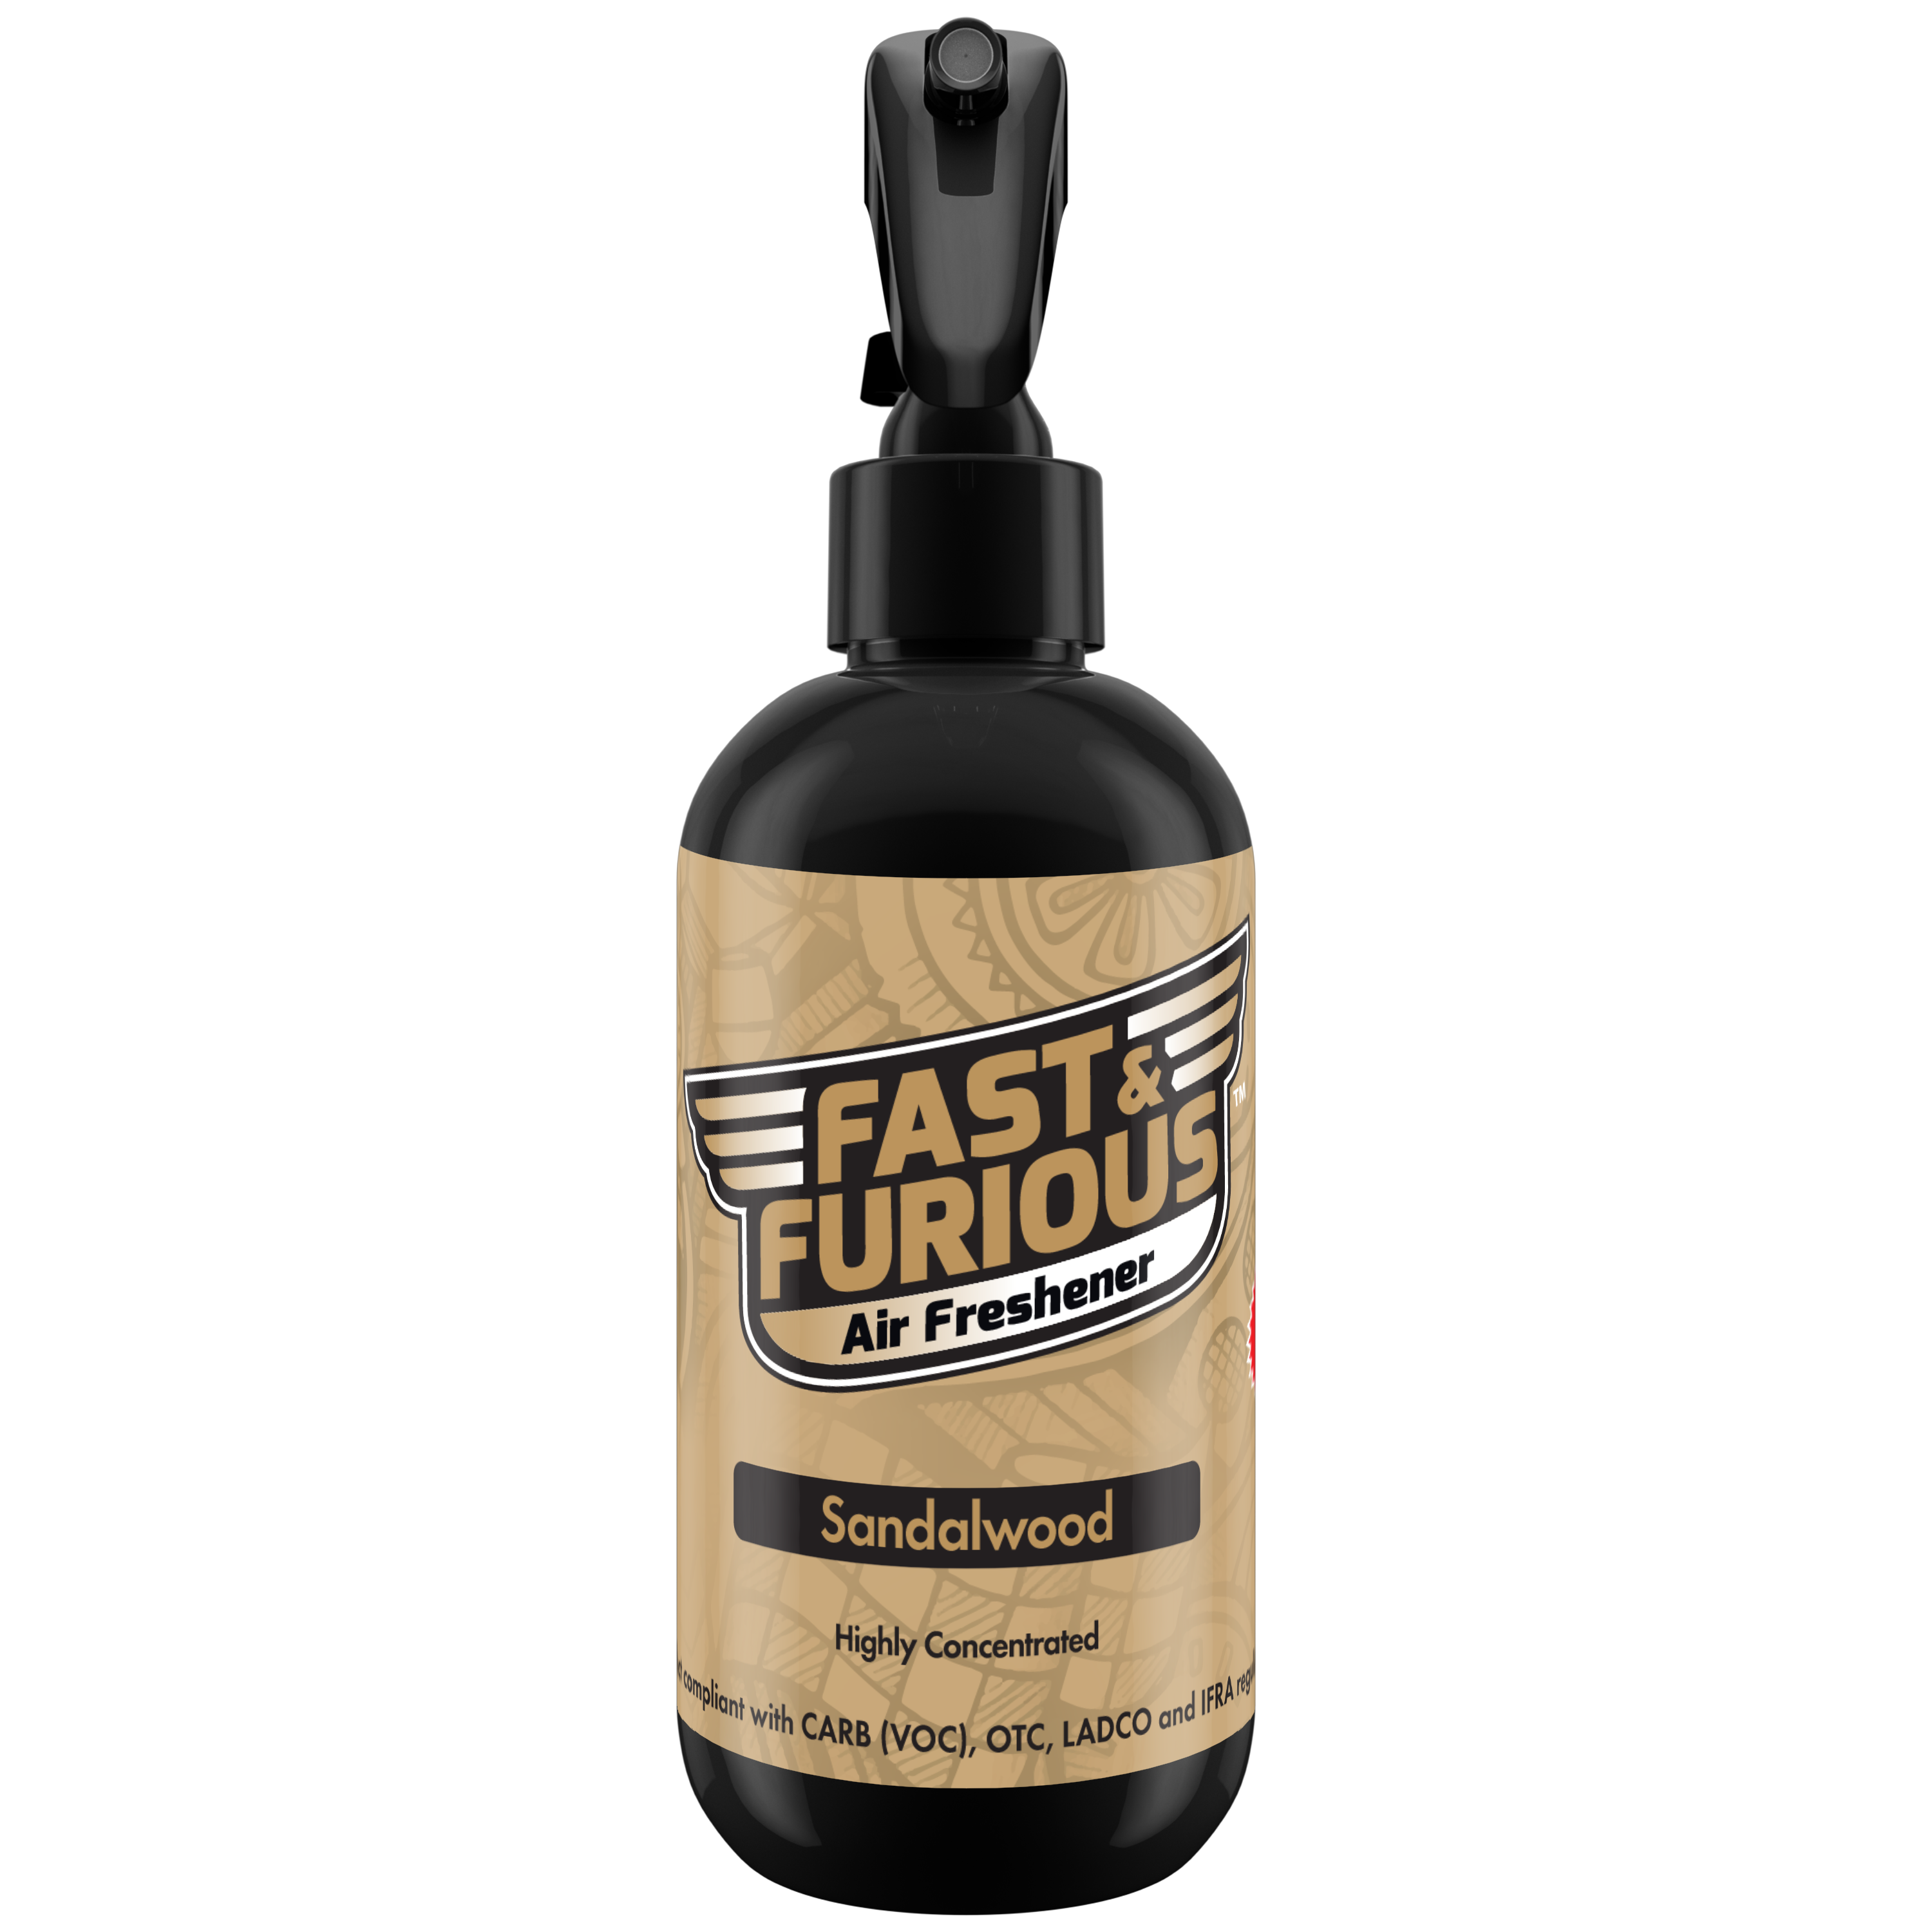 Fast and Furious Air Freshener - Sandalwood  Scent